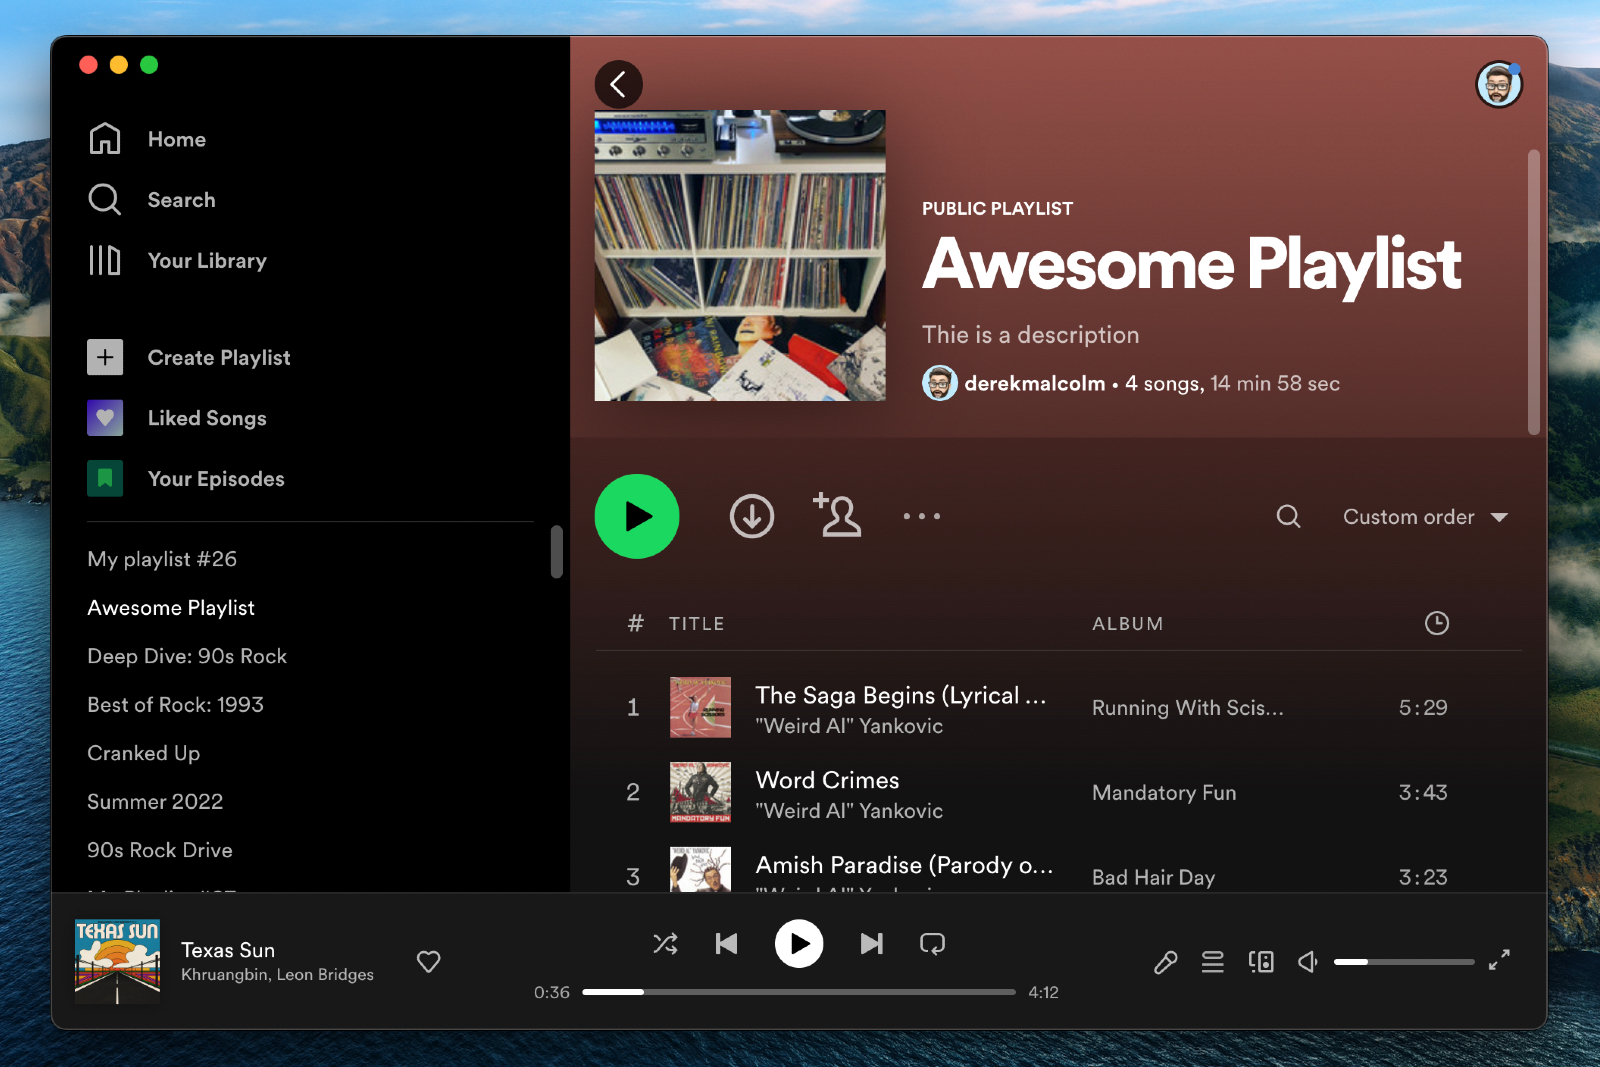  How to make and edit playlists in Spotify